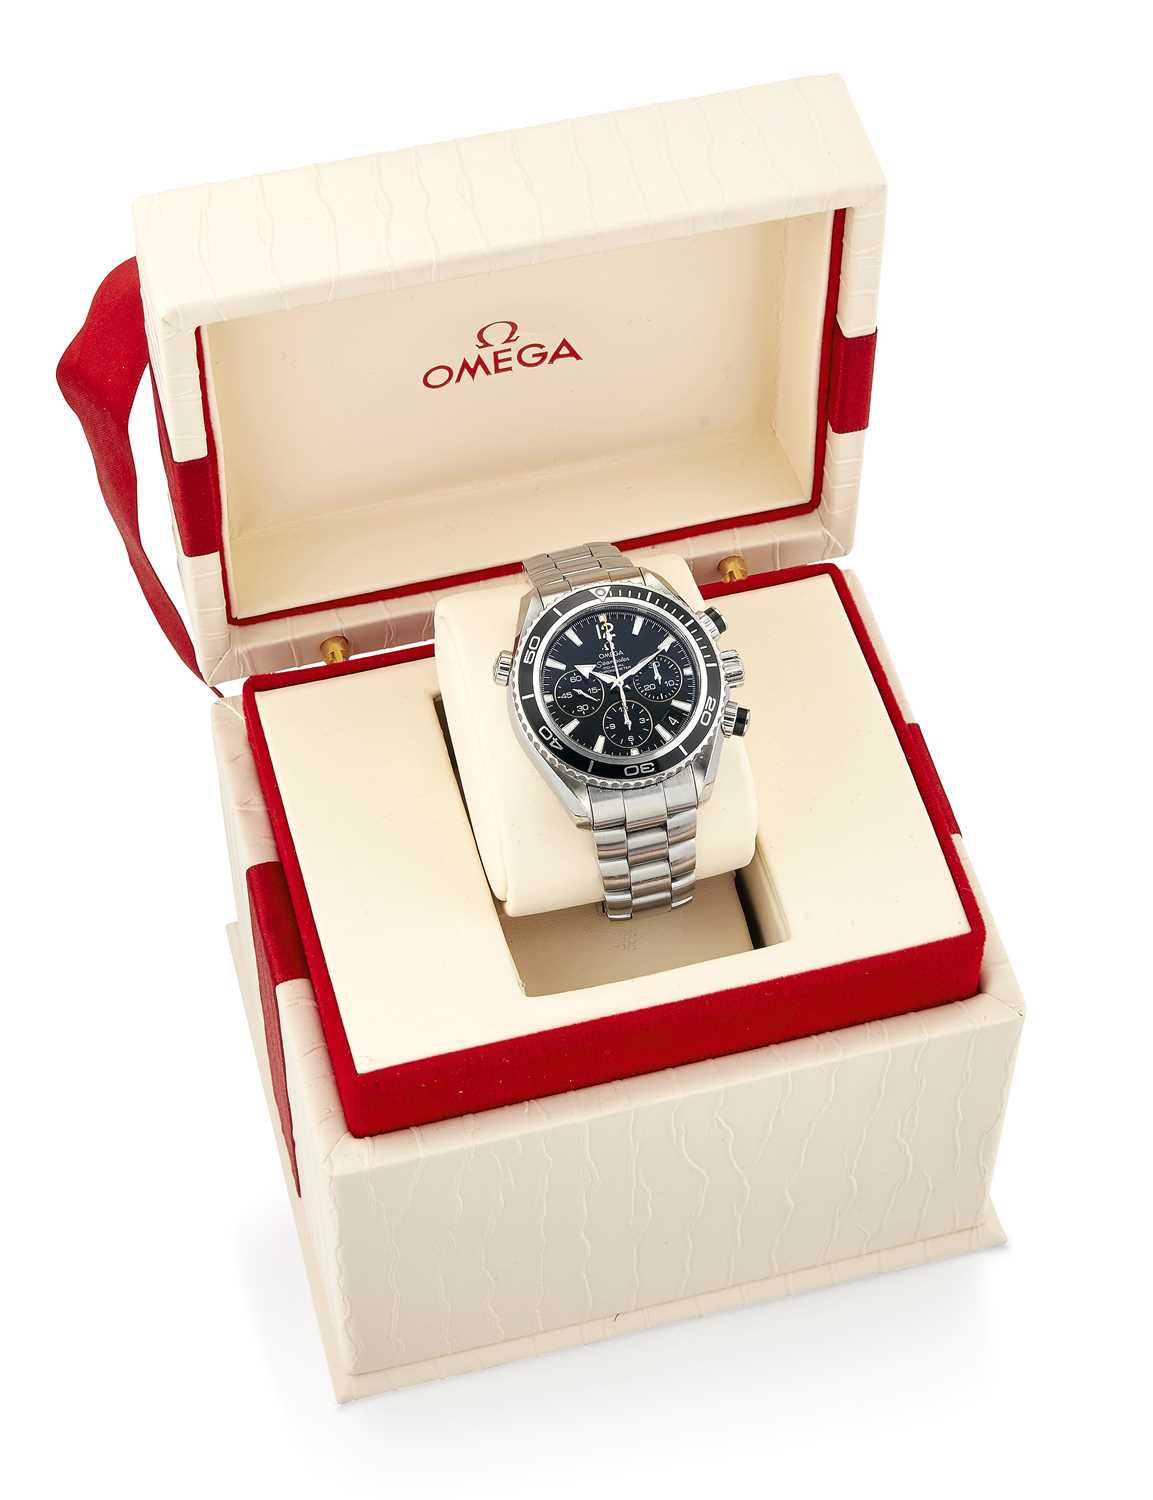 AN OMEGA STEEL 38MM PLANET OCEAN CHRONOGRAPH WATCH - Image 2 of 5